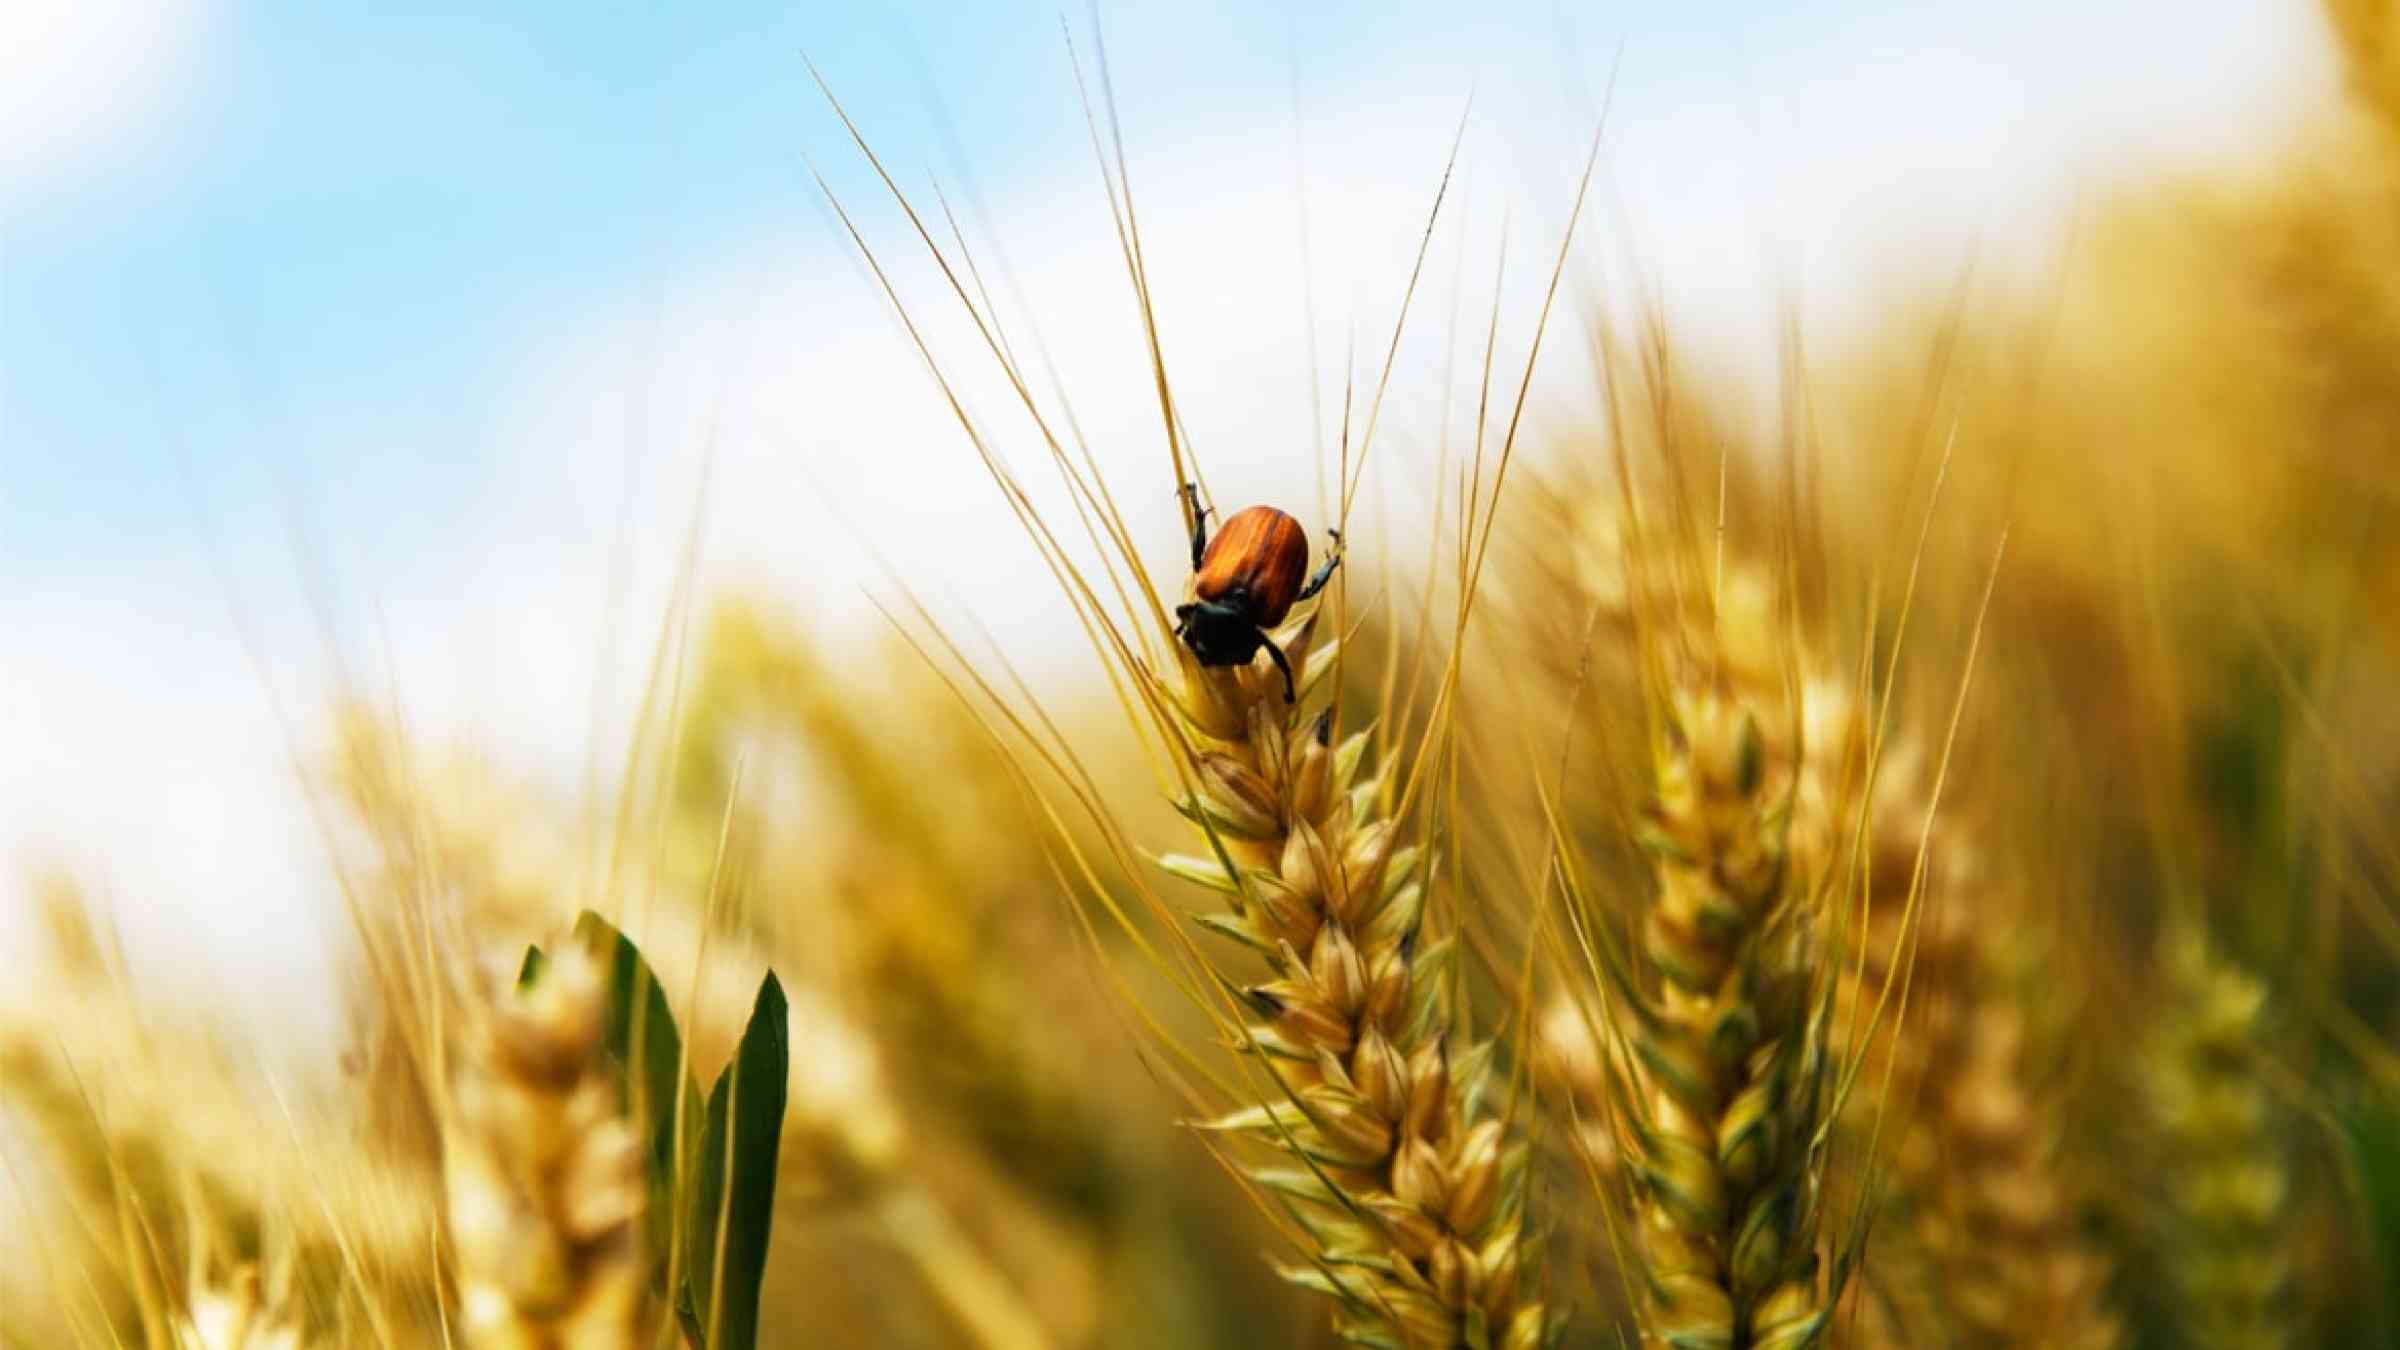 Africa: An app to help African farmers defeat crop pests | PreventionWeb